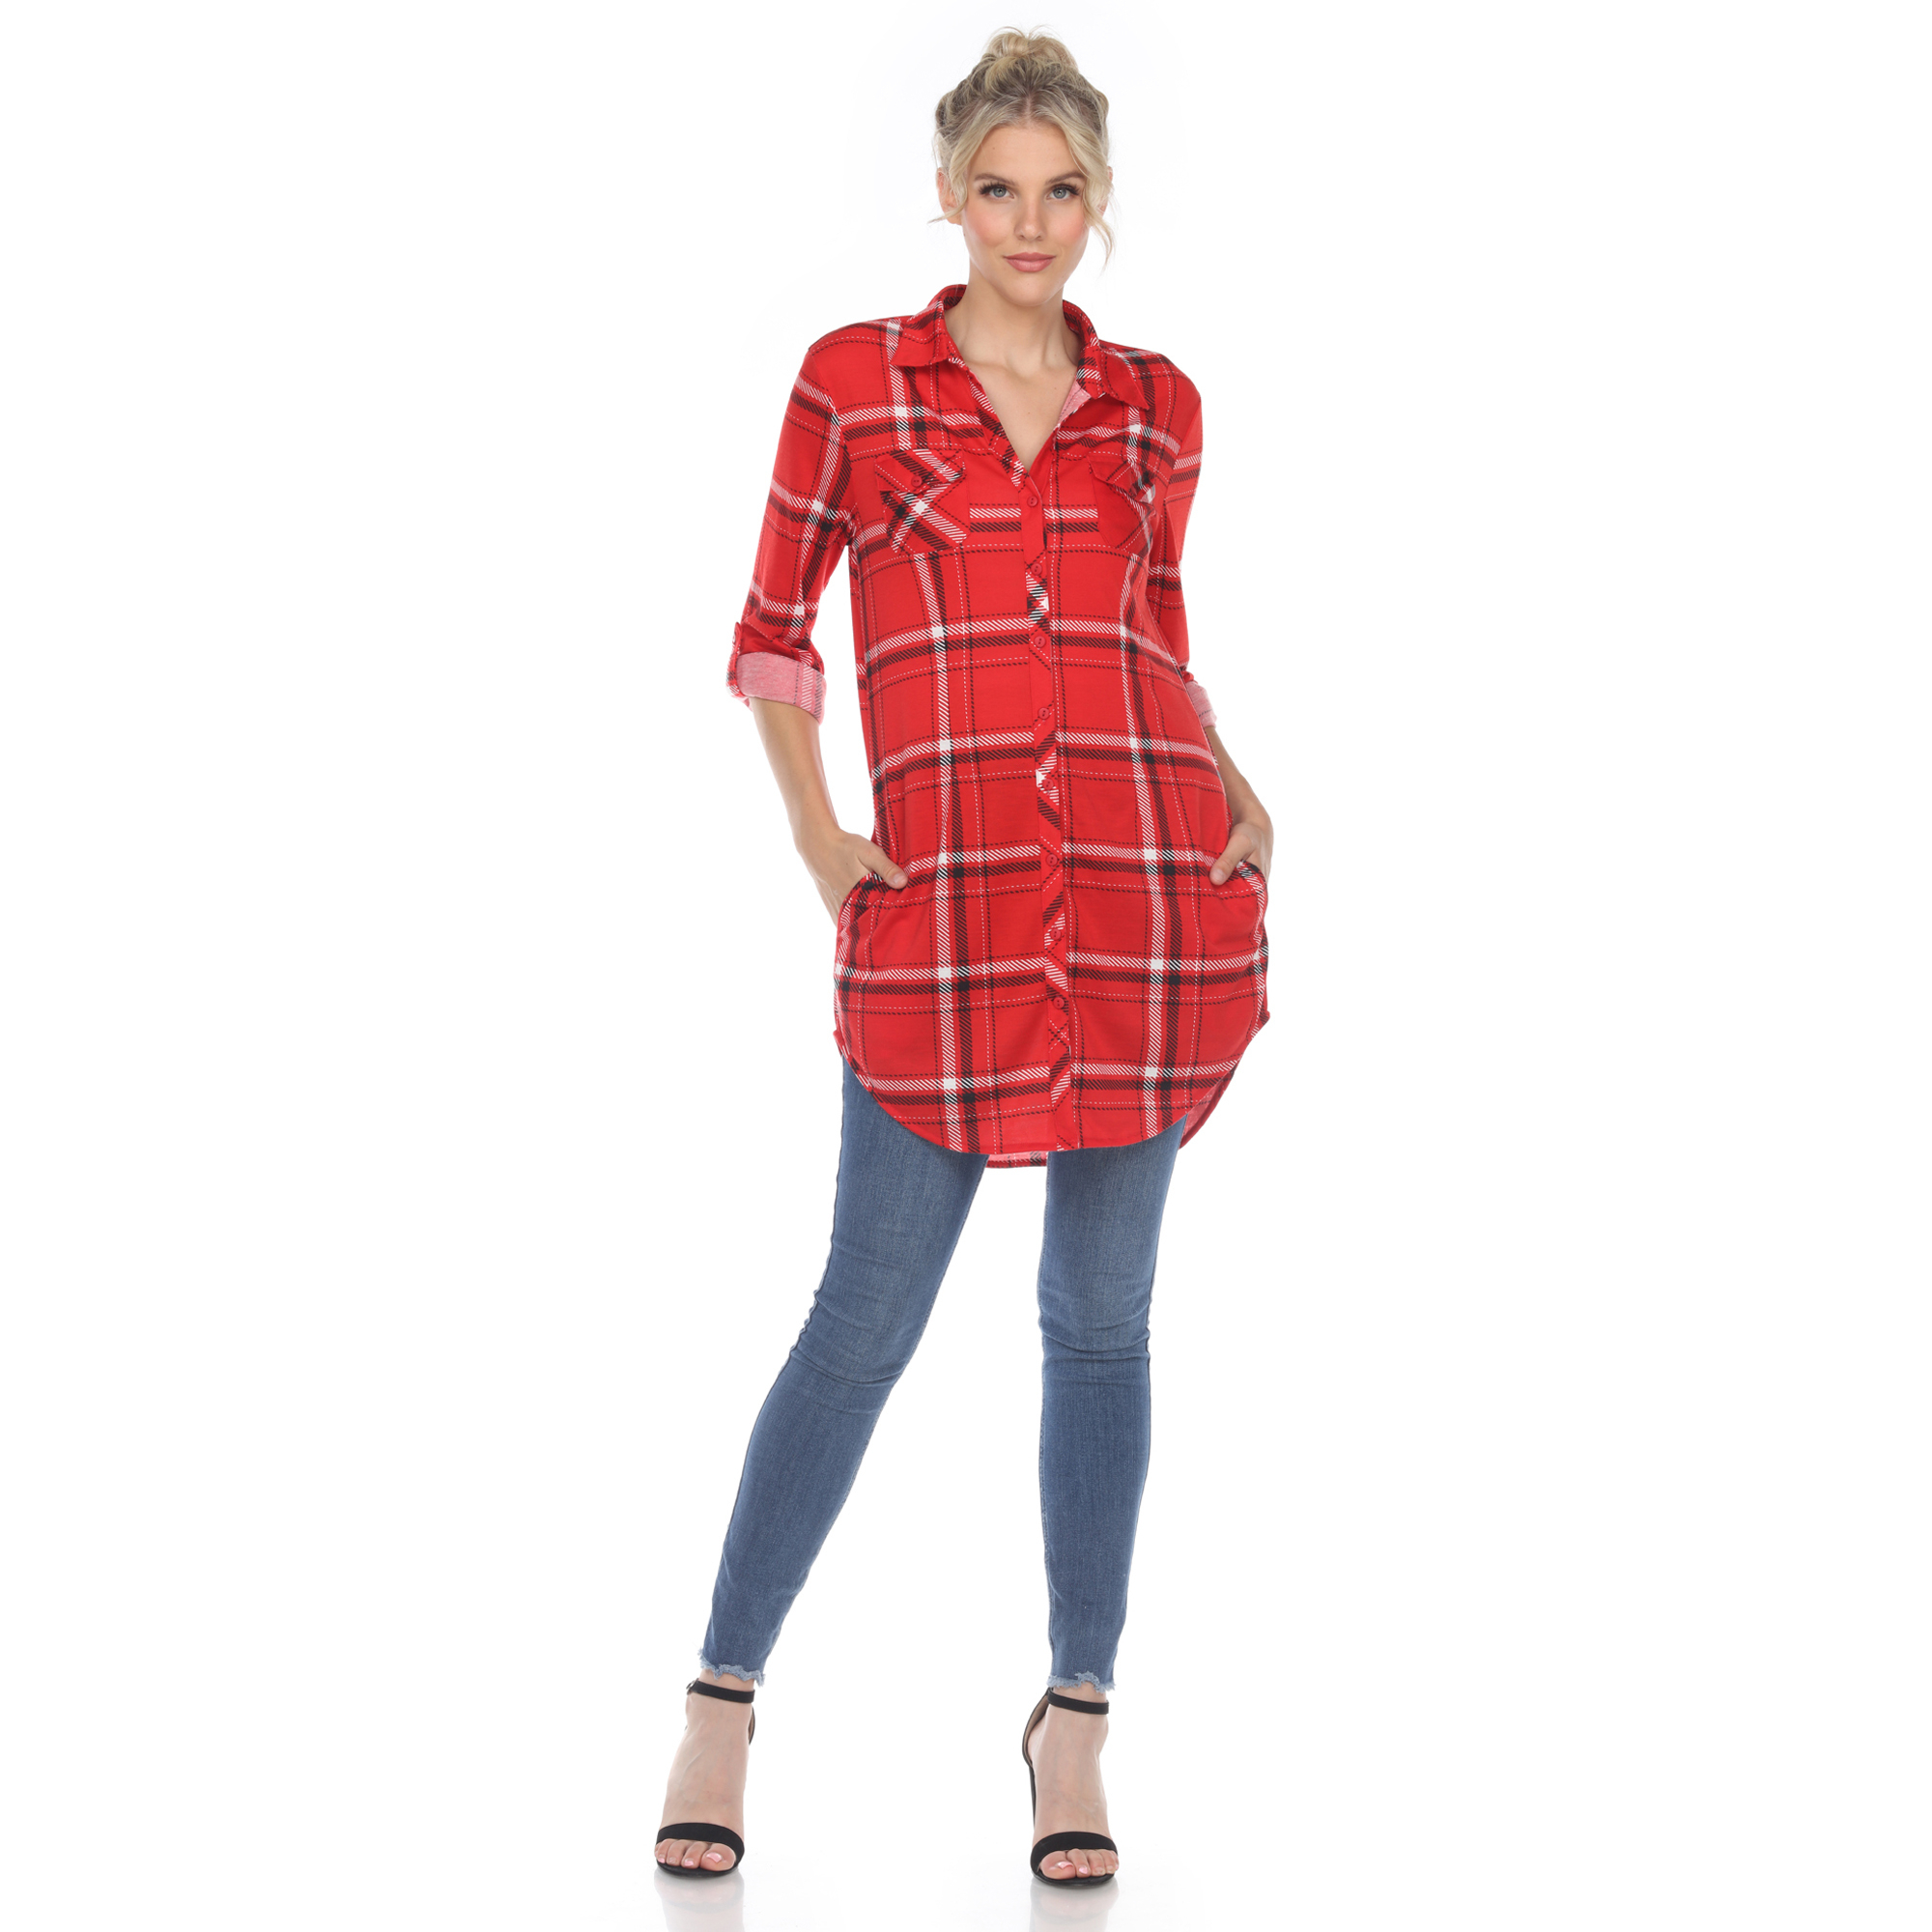 White Mark Women's Stretchy Windowpane Plaid Tunic Top - Red, Small